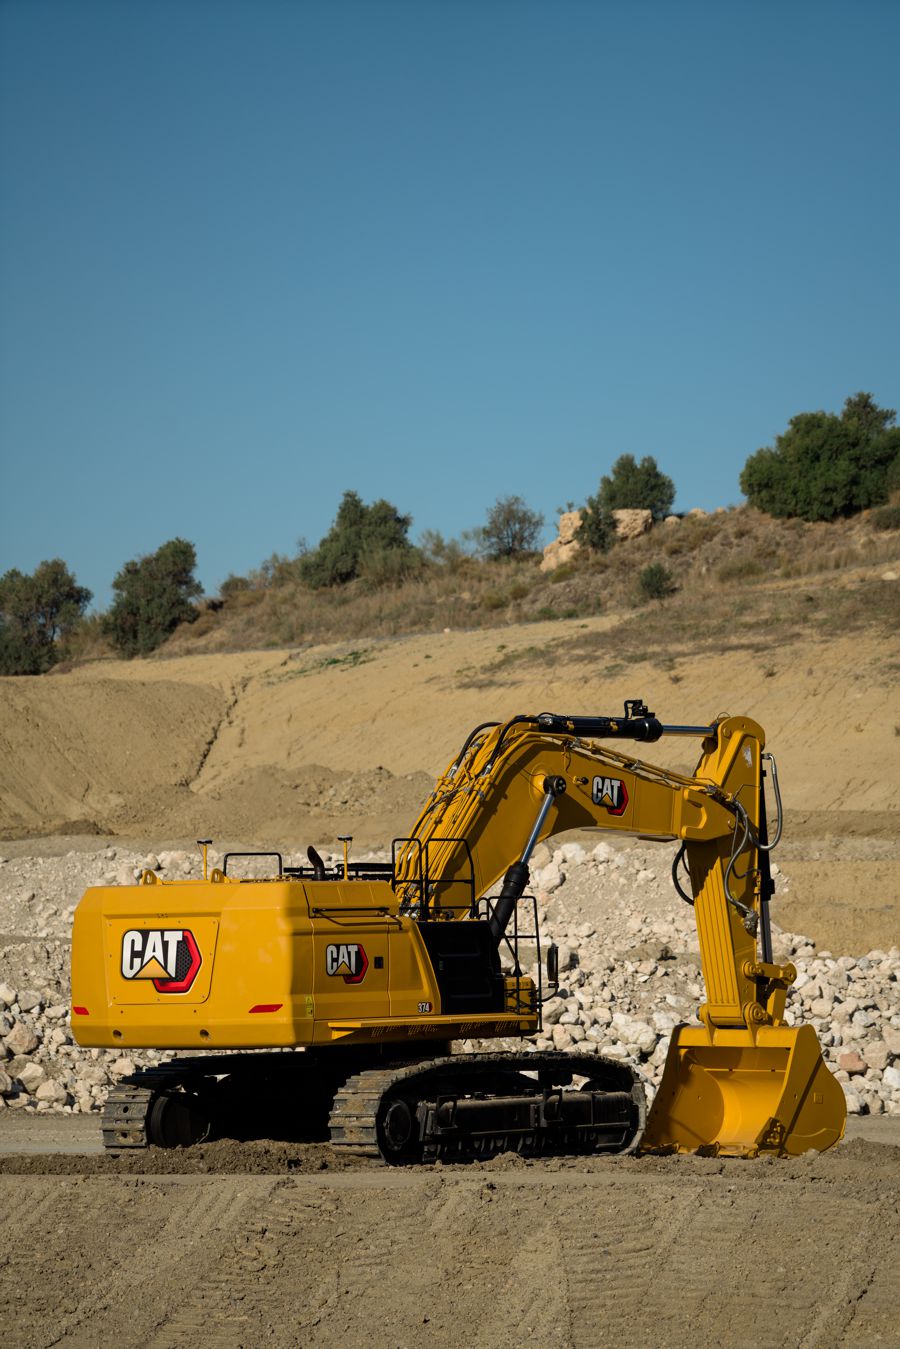 New Cat 374 Excavator designed for high-production and durability